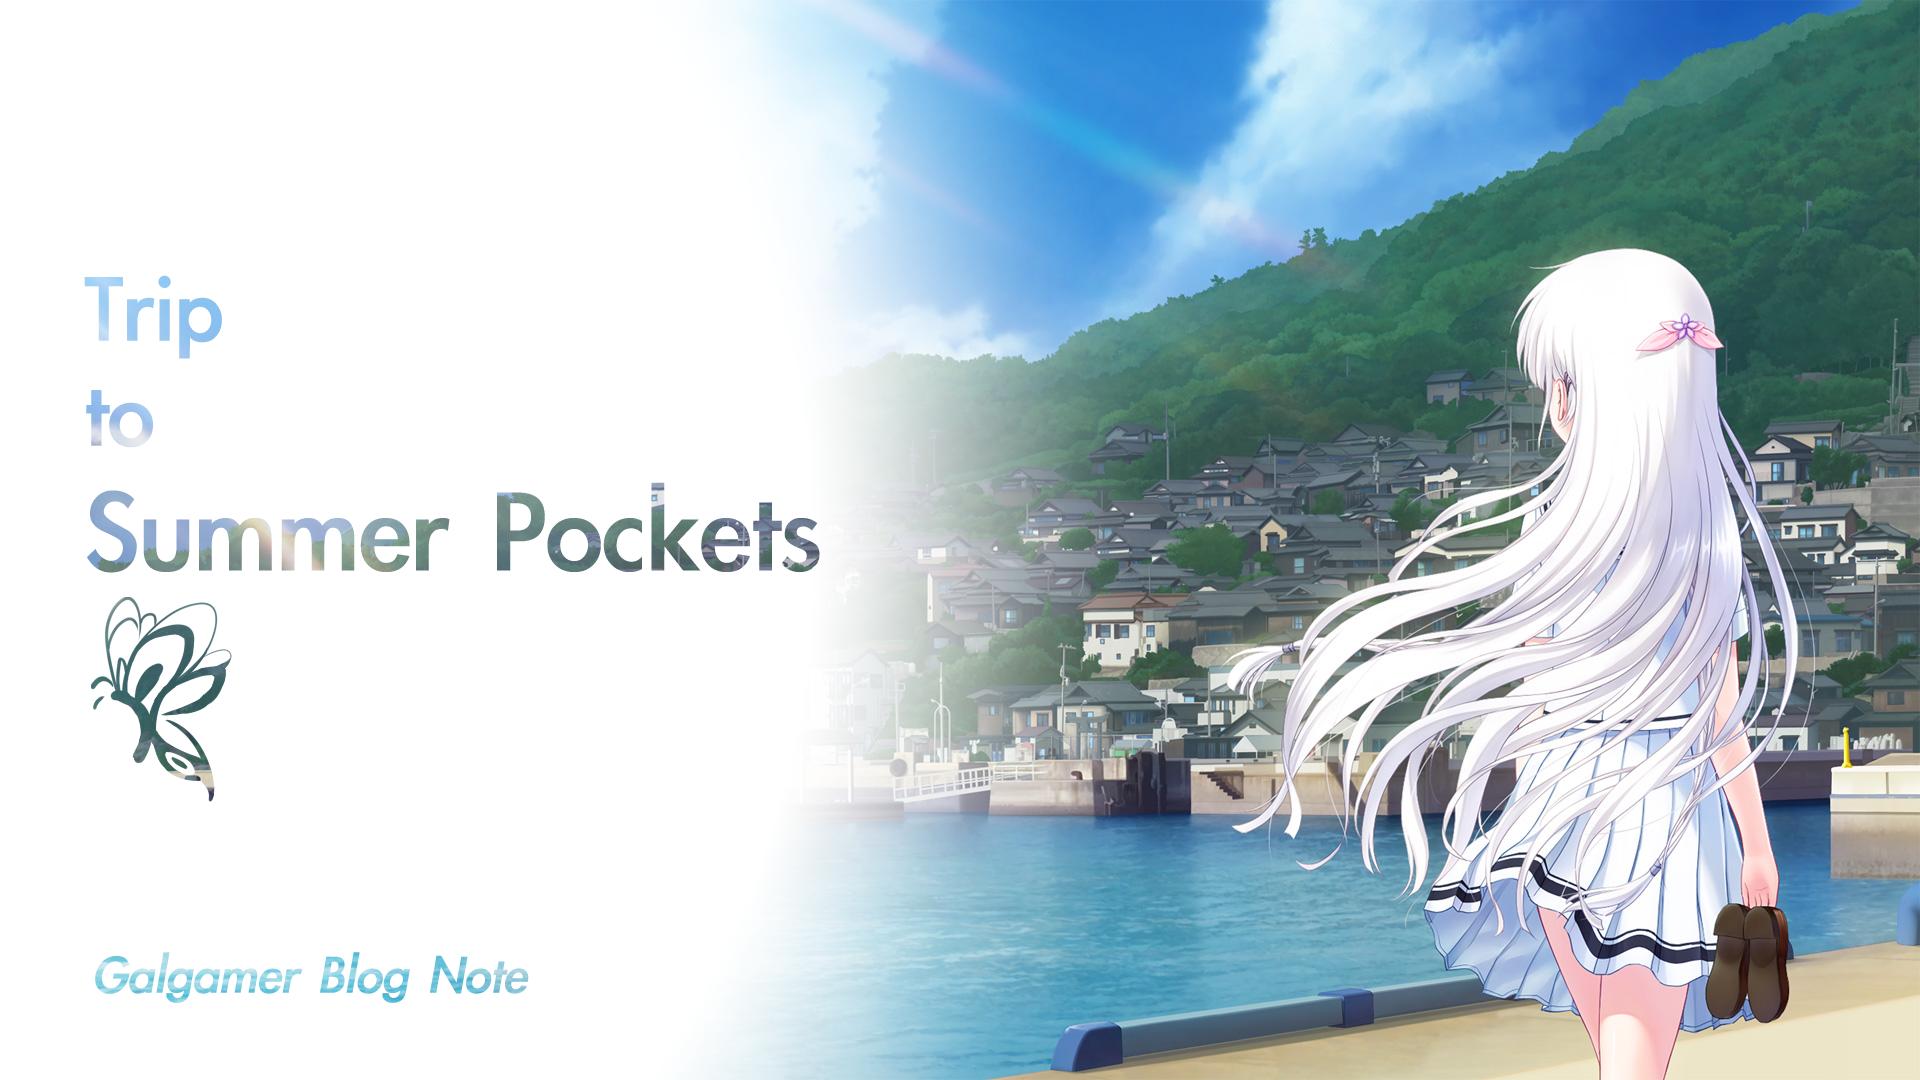 Cover Image for Blog Note 8：Summer Pockets 聖地考察指南 - 前篇